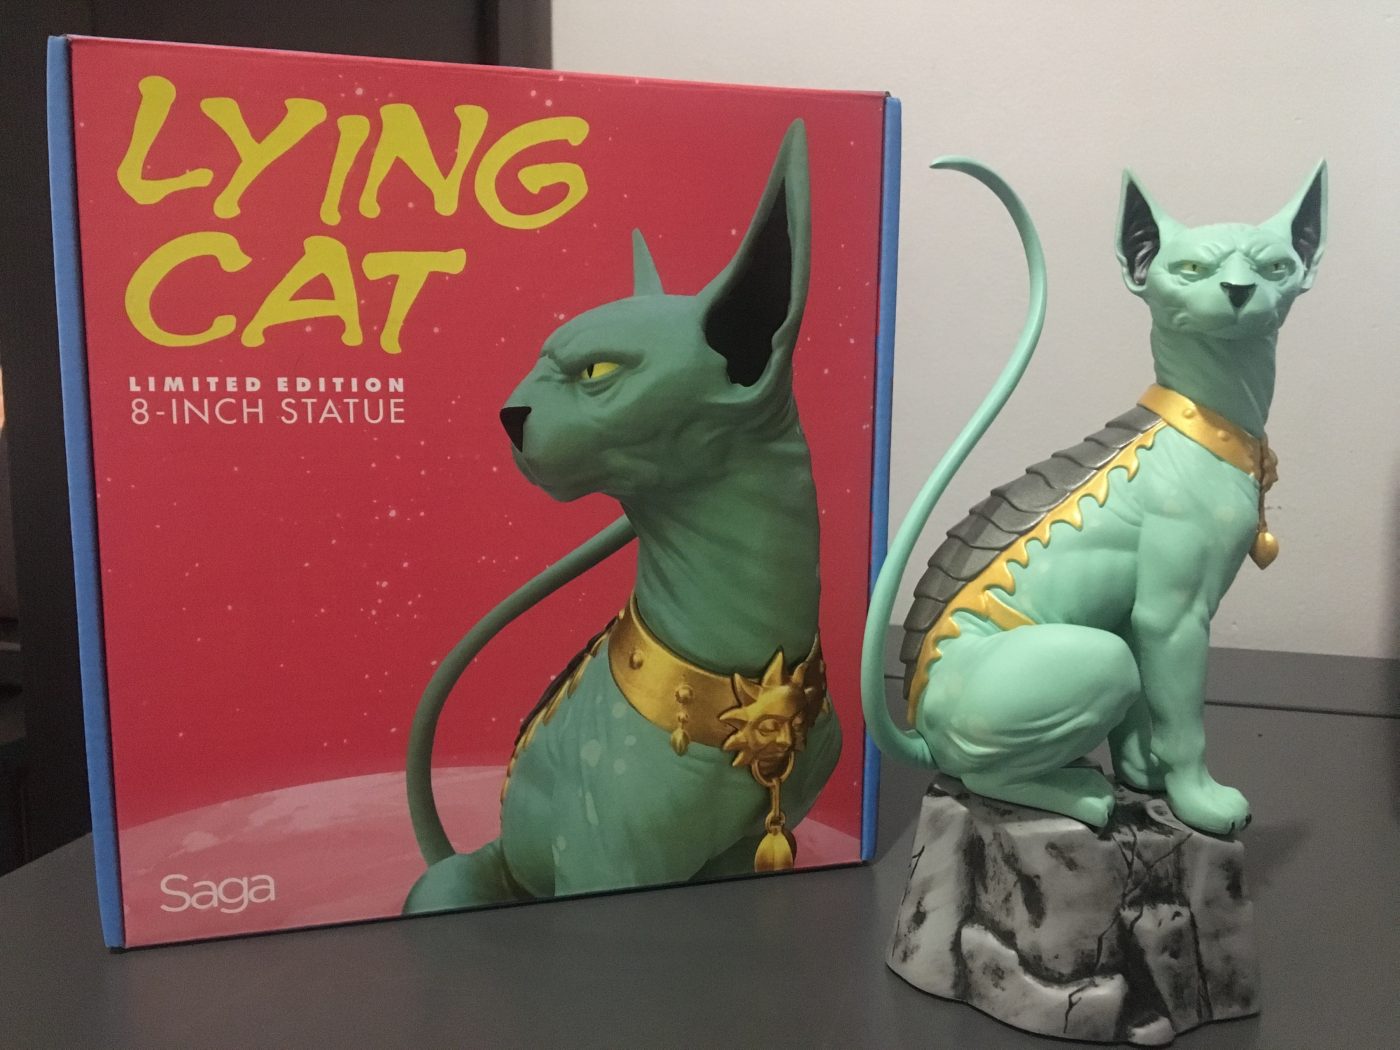 Unboxing/Review: Saga Lying Cat limited edition 8-inch statue